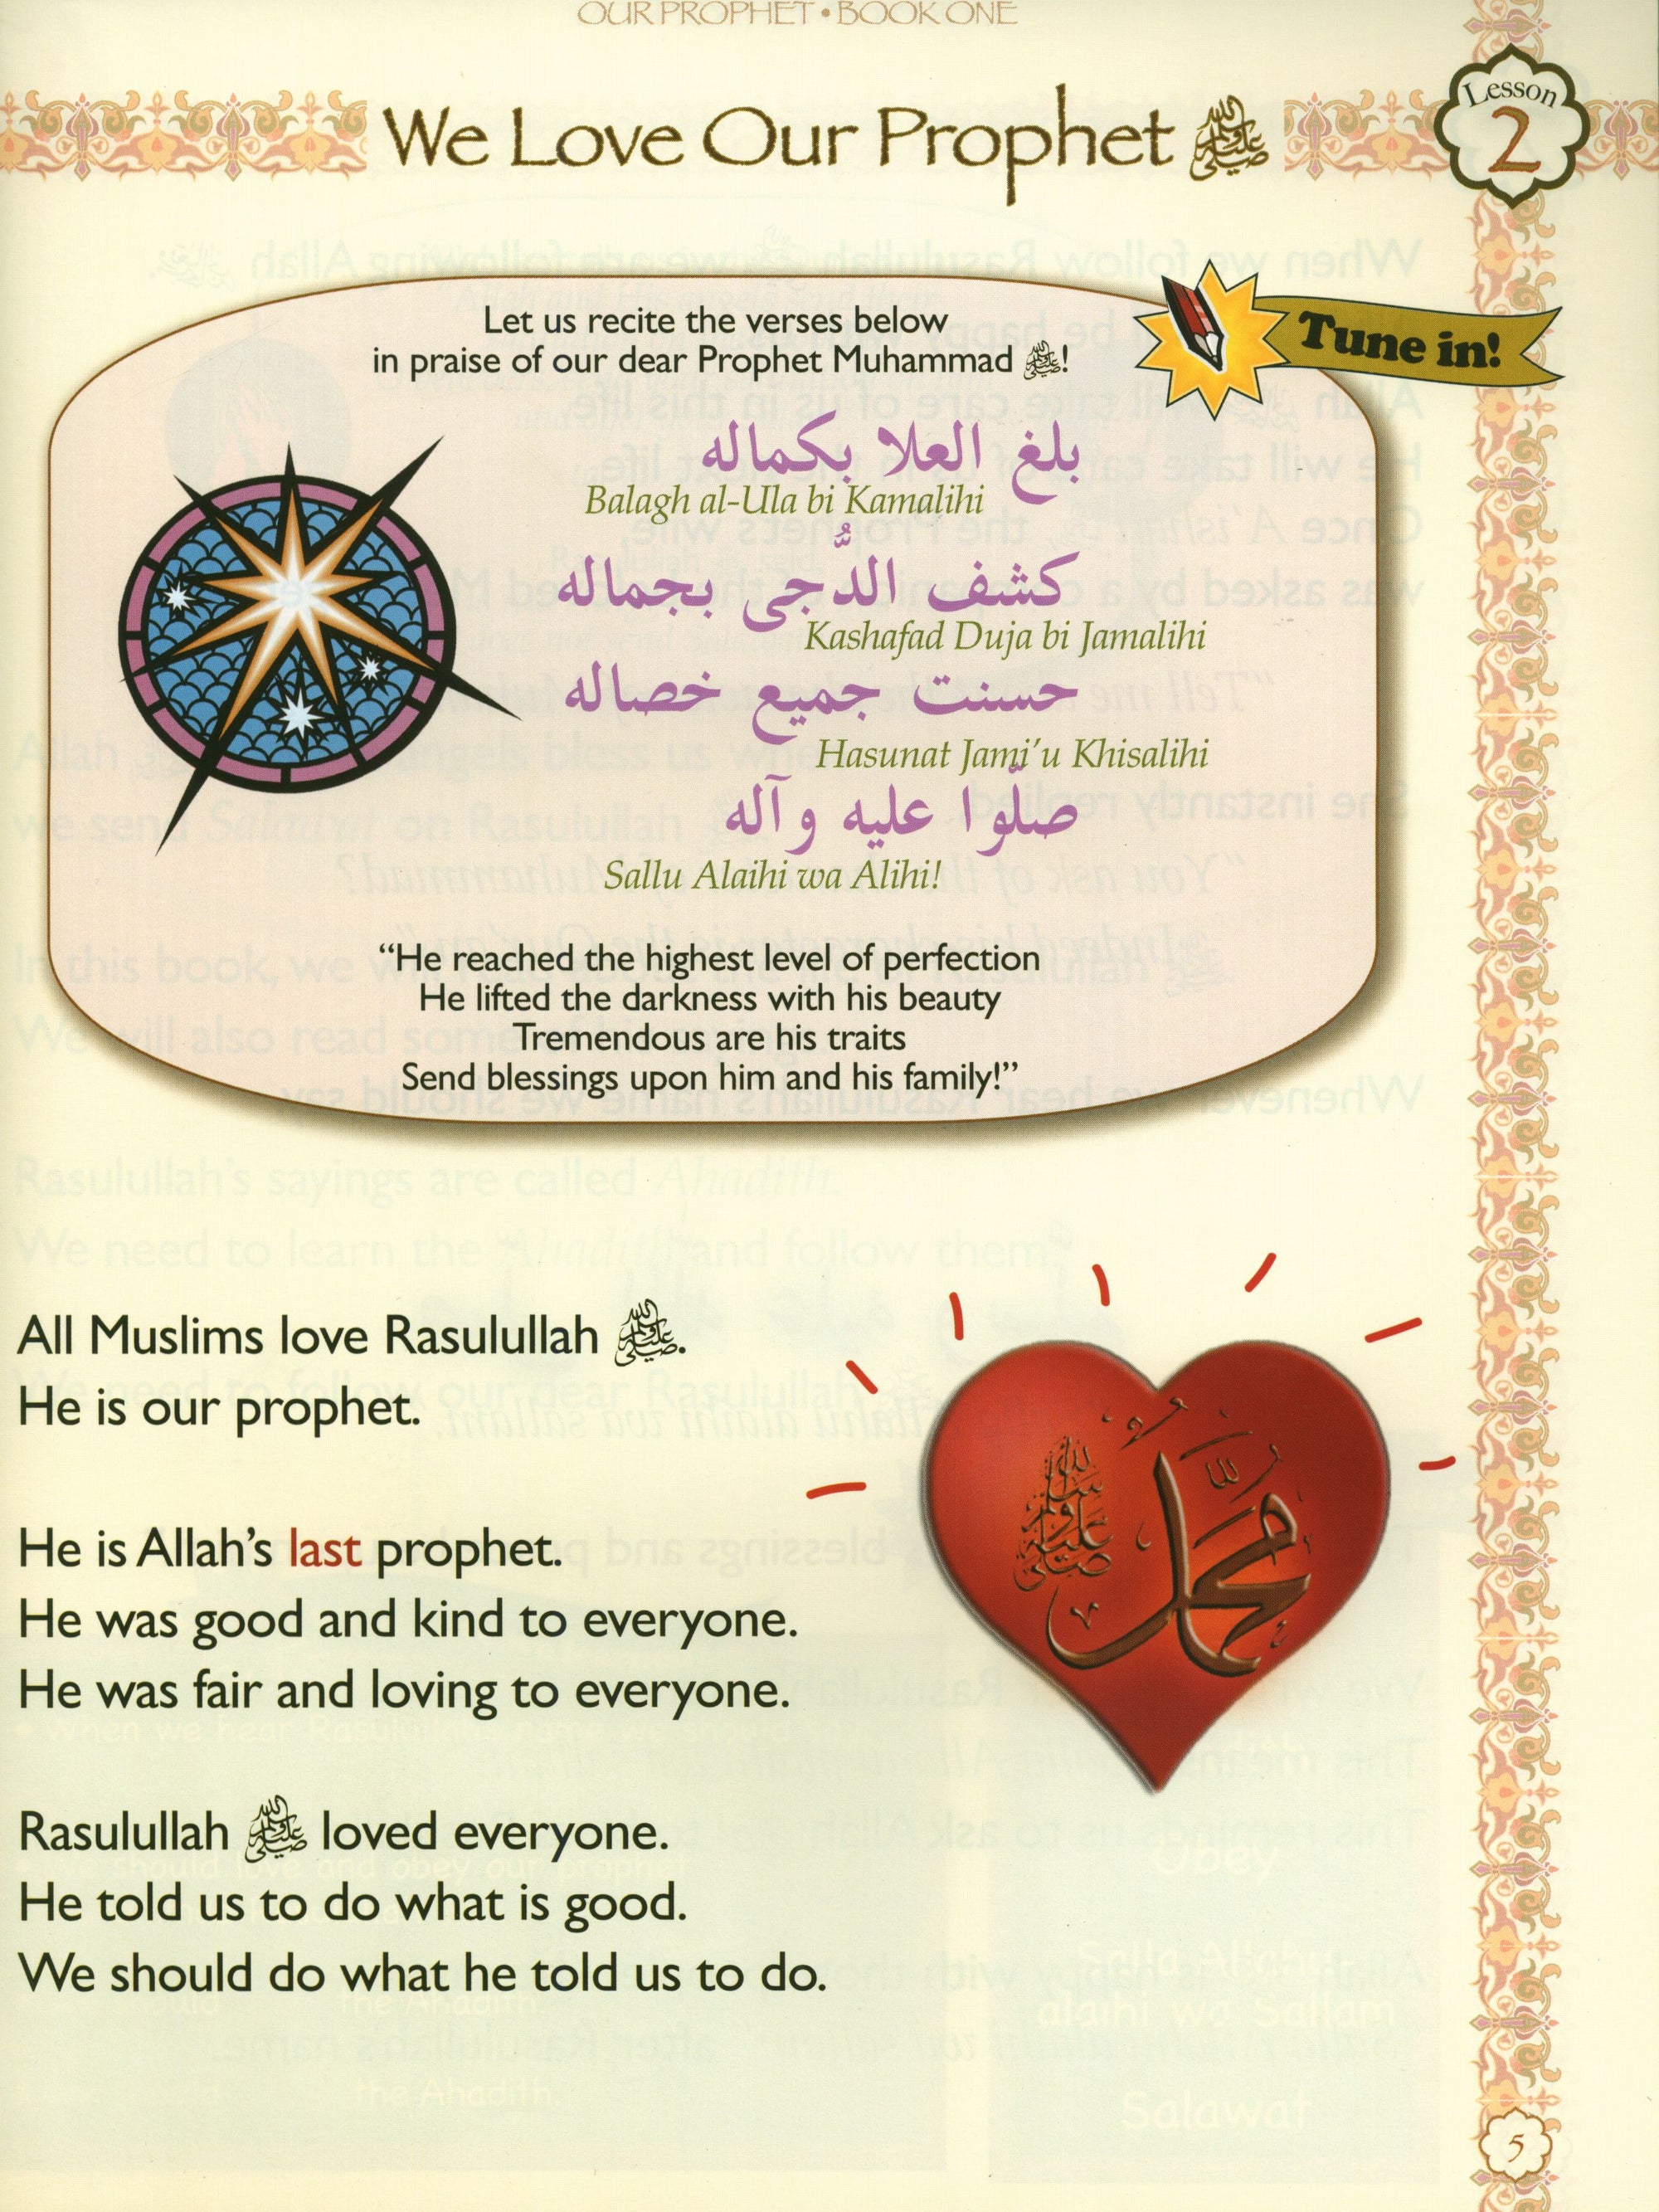 Our Prophet Muhammad (s) Life in Makkah Textbook - 2nd Grade (Sirah of Our Prophet - A Mercy to Mankind Textbook 2nd Grade)